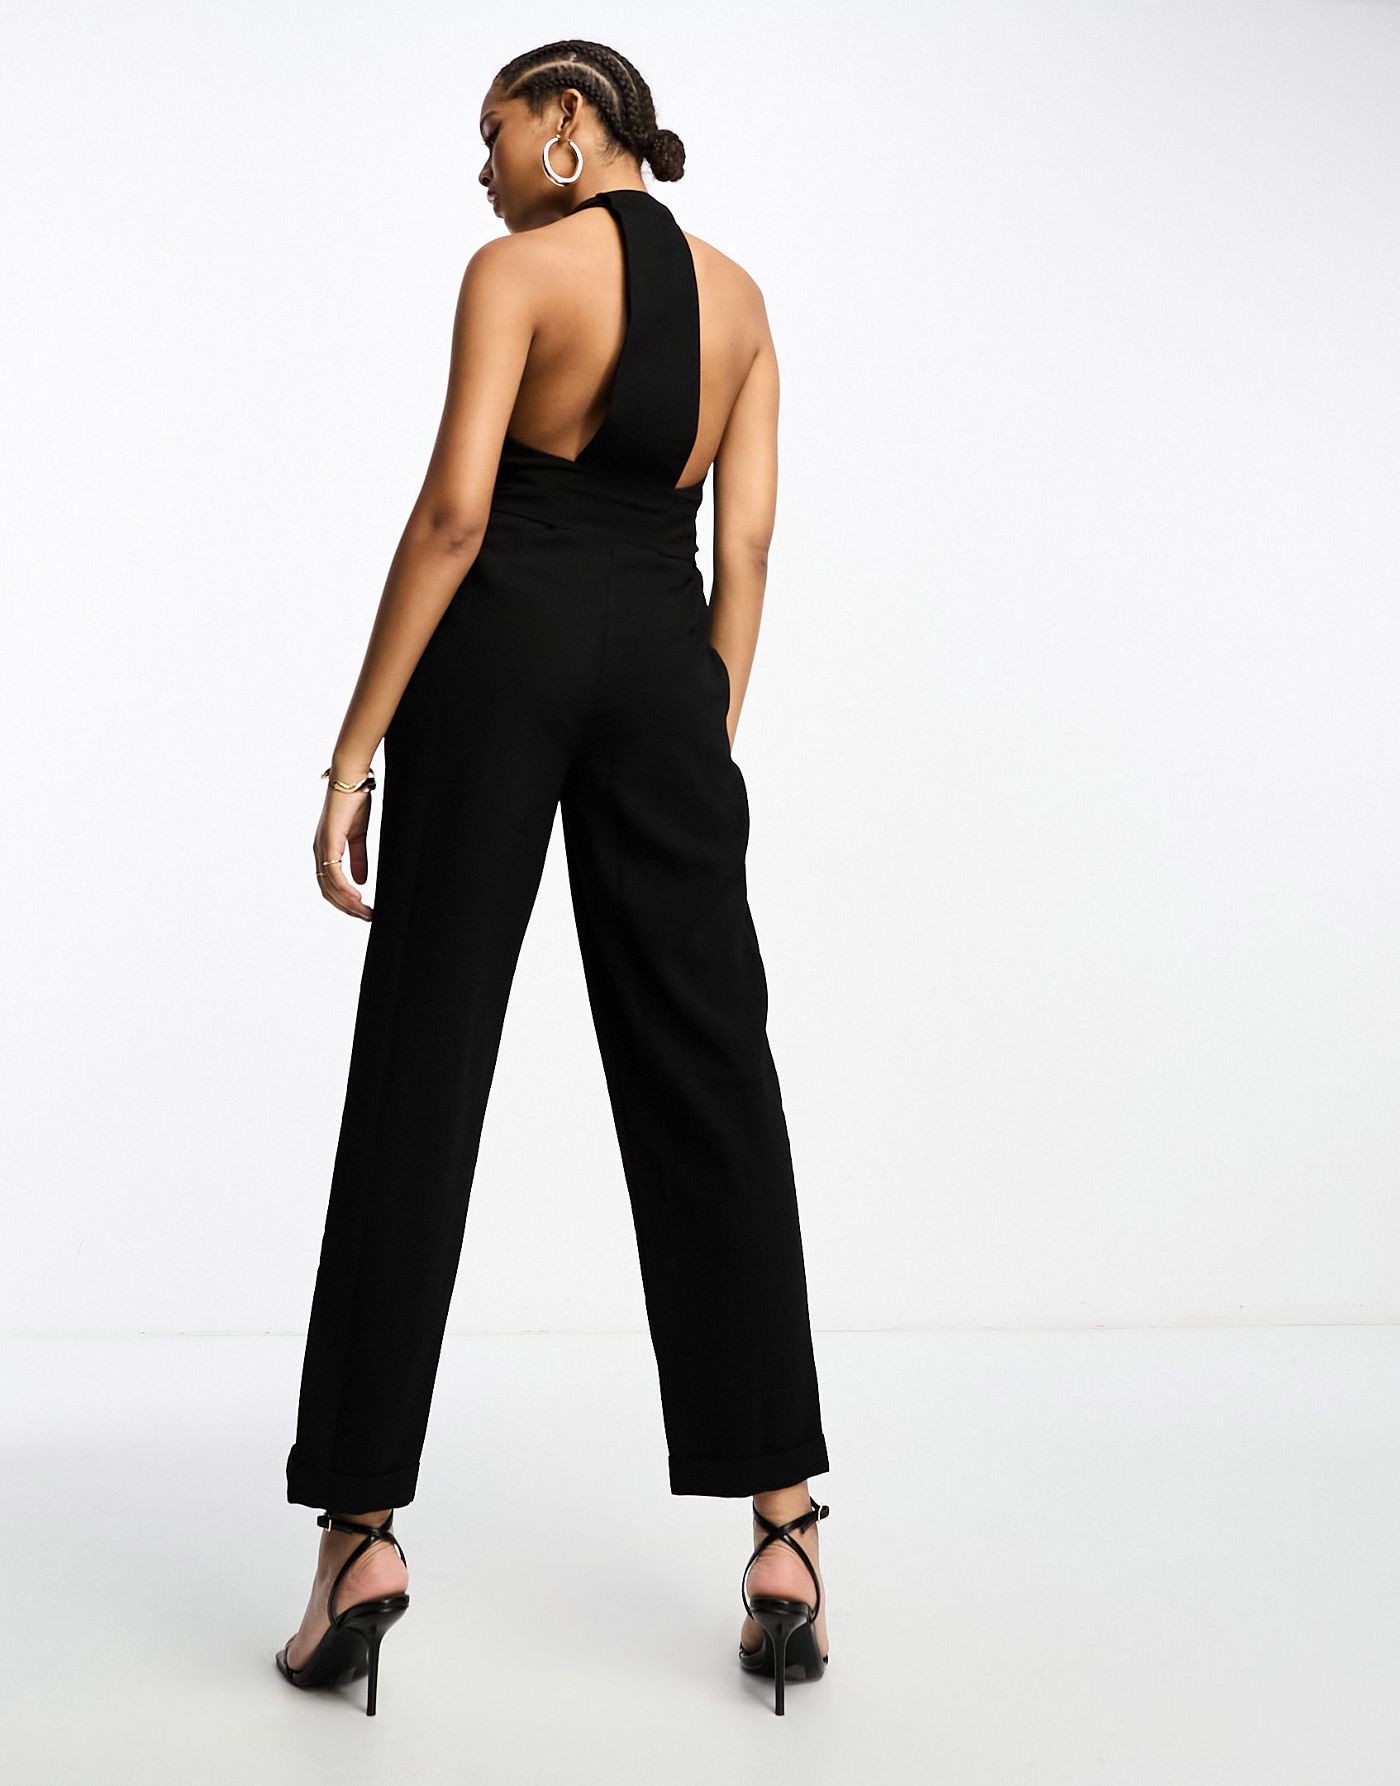 Never Fully Dressed tailored wrap jumpsuit in black